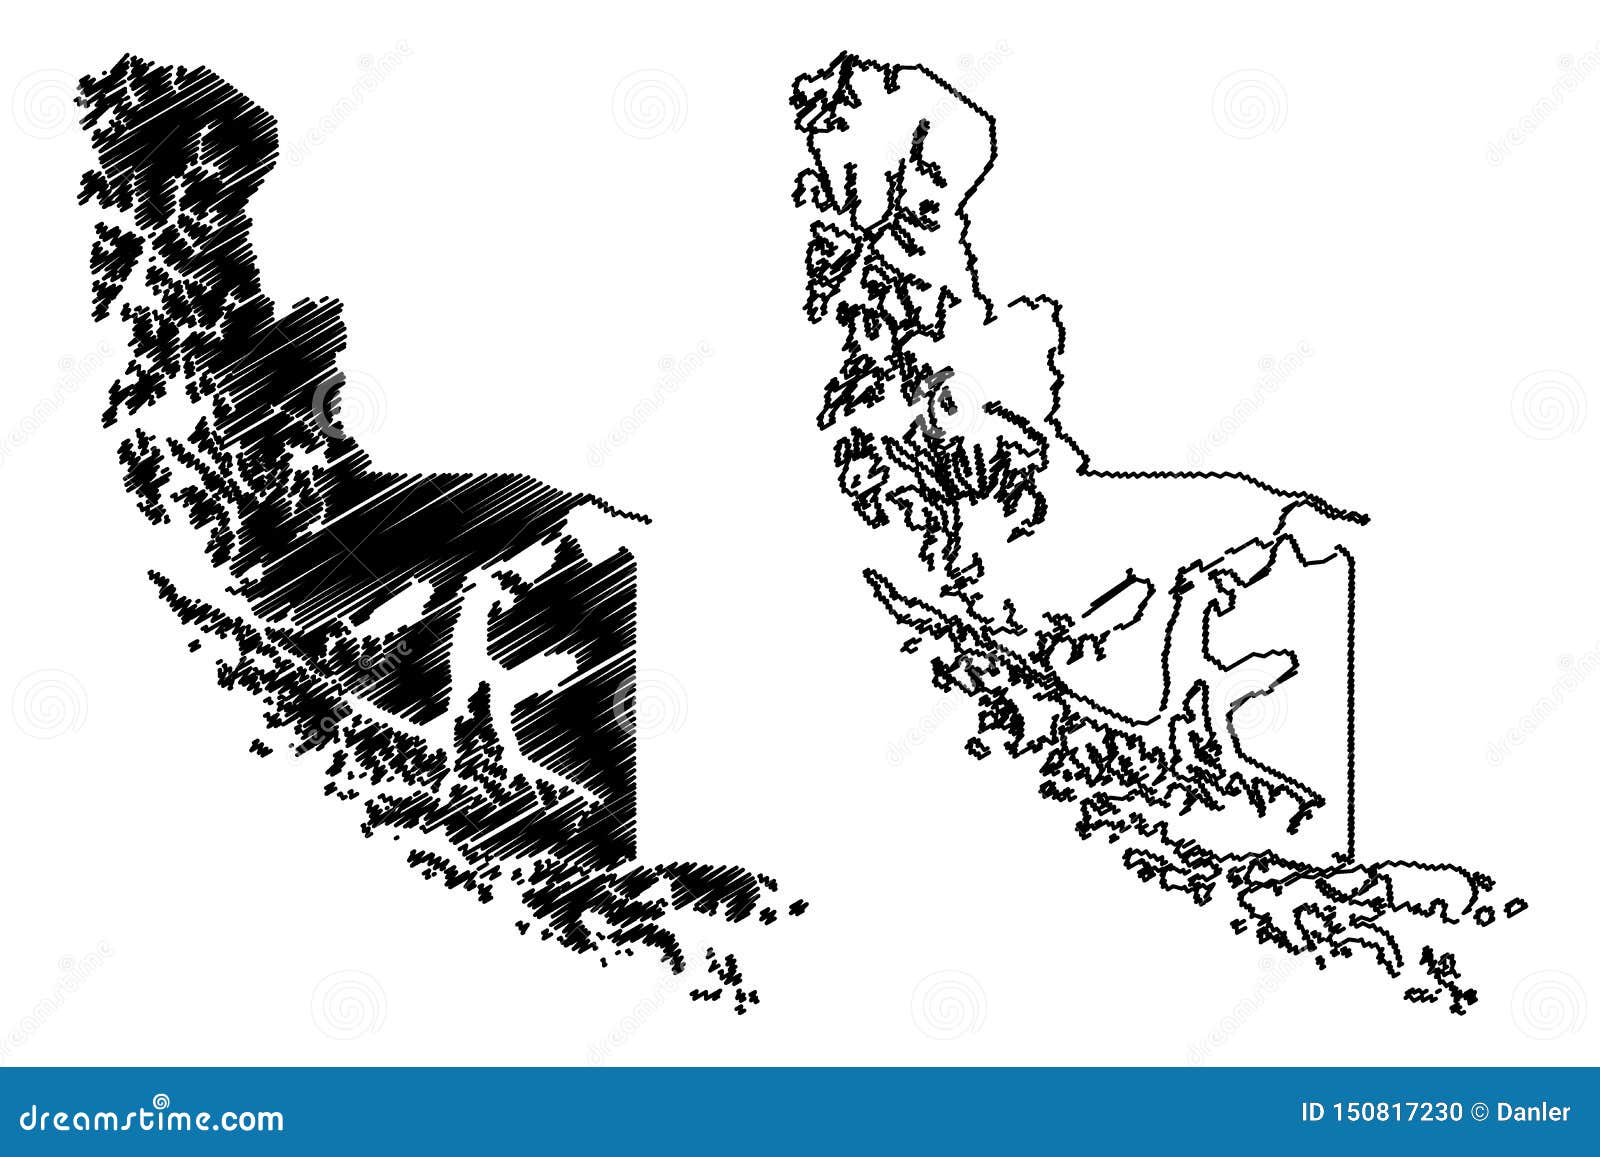 magallanes region republic of chile, administrative divisions of chile map  , scribble sketch magallanes and